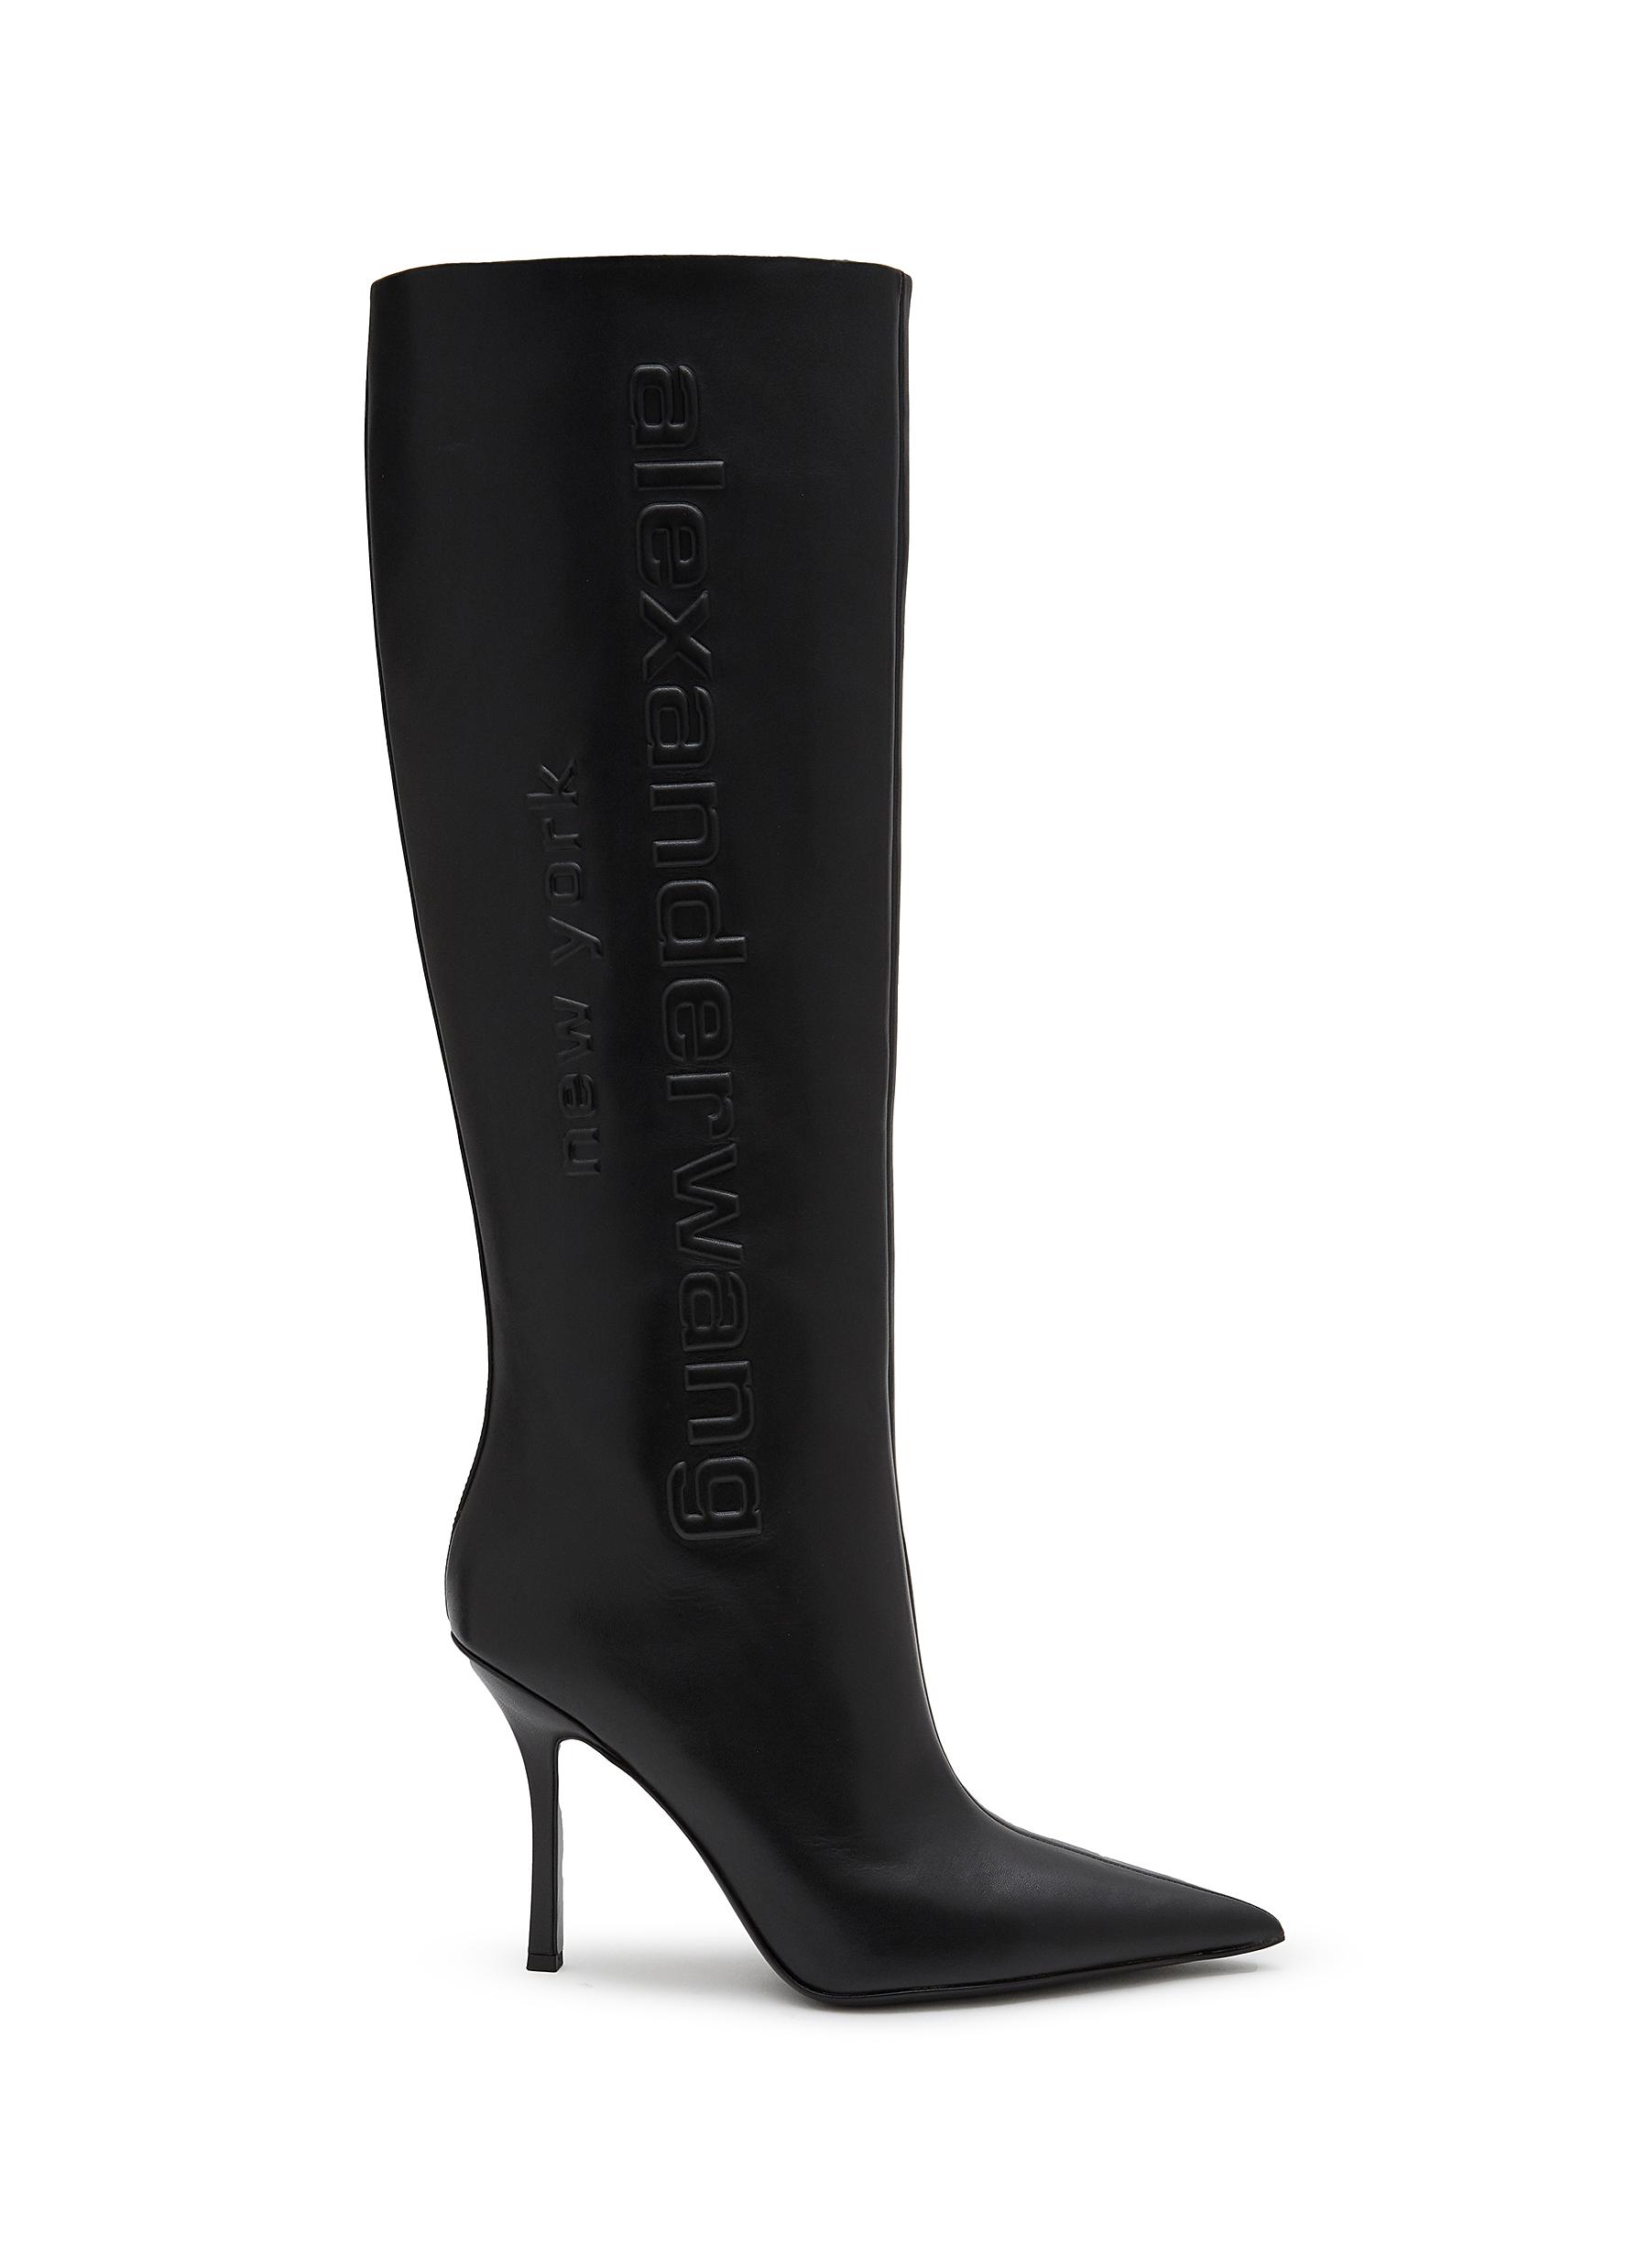 Delphine 105 Tall Leather Boots